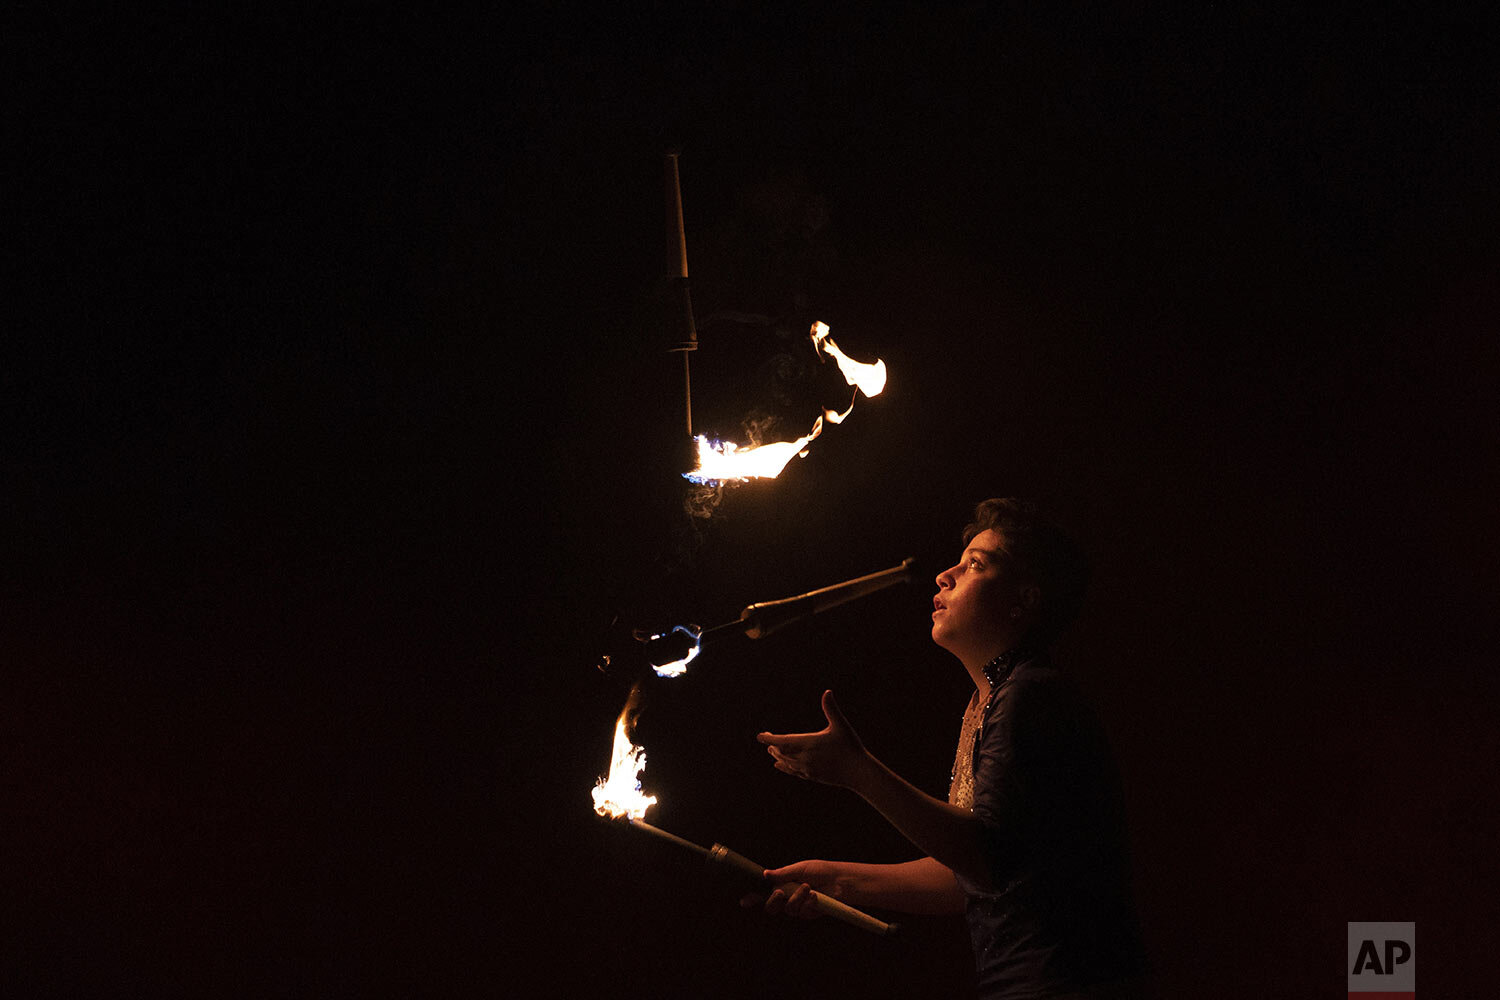  Lucas juggles with fire at the Estoril Circus drive-in show in Itaguai, in greater Rio de Janeiro, Brazil, July 18, 2020. (AP Photo/Leo Correa) 